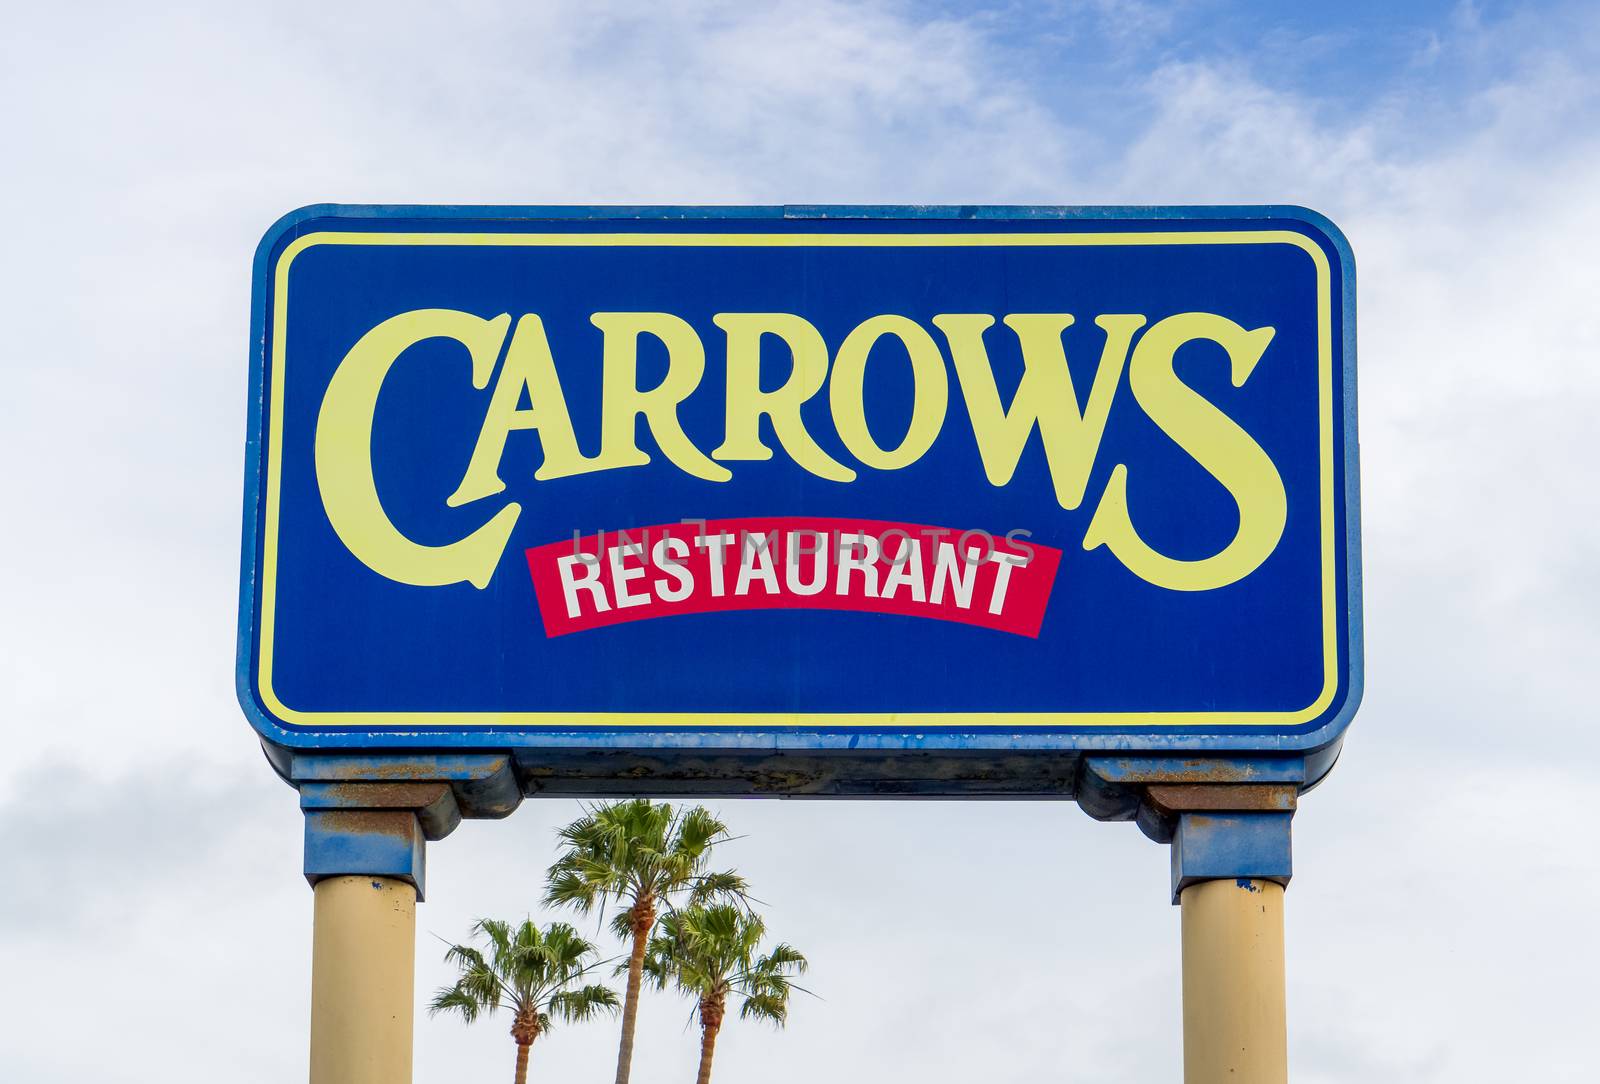 VENTURA, CA/USA - MARCH 4, 2016: Carrows Restaurant sign and logo. Carrows is a chain of casual dining restaurants in the western portion of the United States.